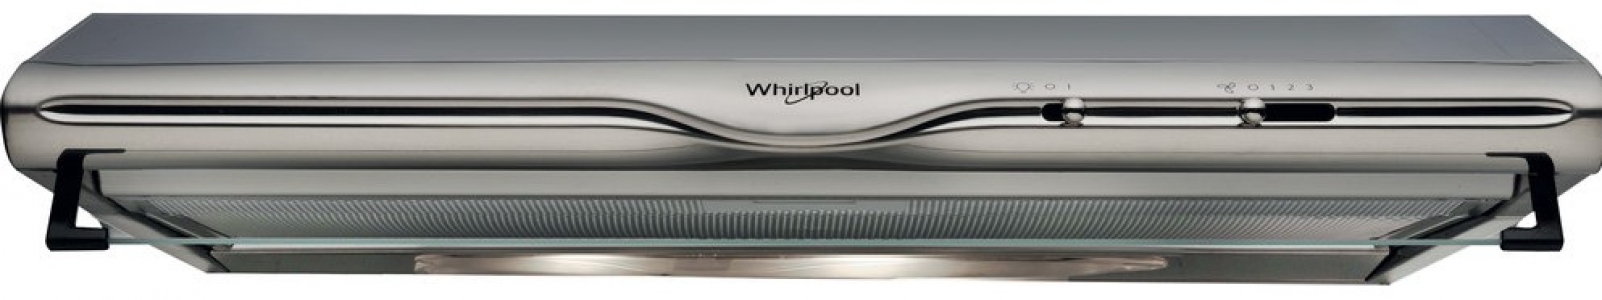 WHIRLPOOL WCN65FLX - Hotte casquette